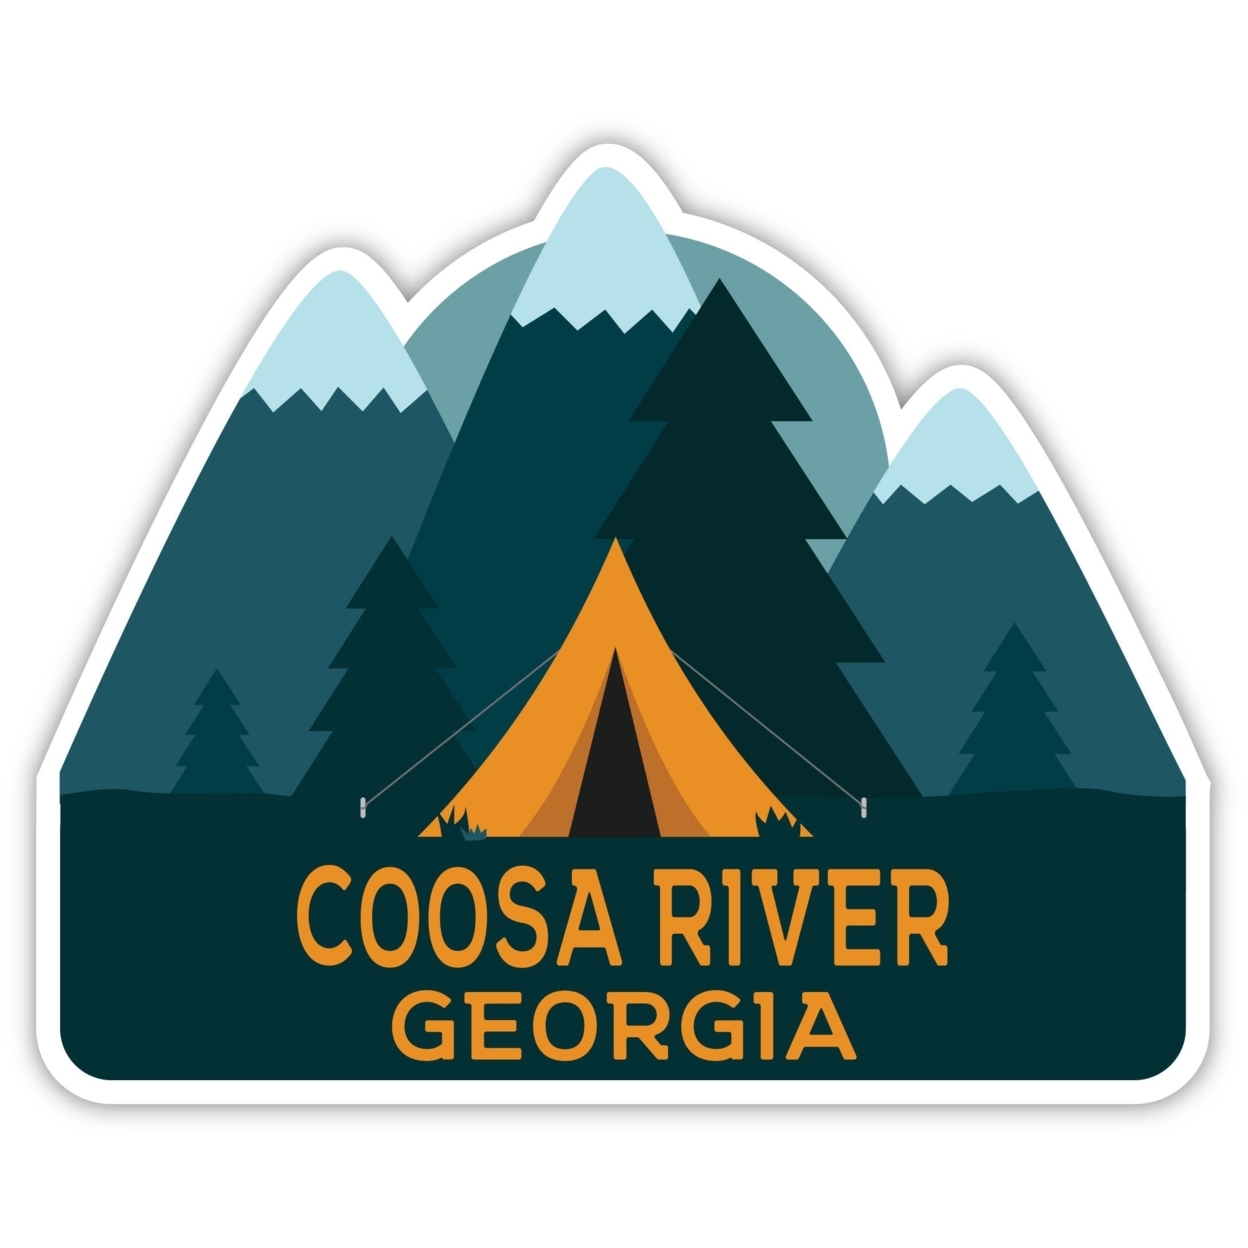 Coosa River Georgia Souvenir Decorative Stickers (Choose Theme And Size) - 4-Pack, 12-Inch, Tent